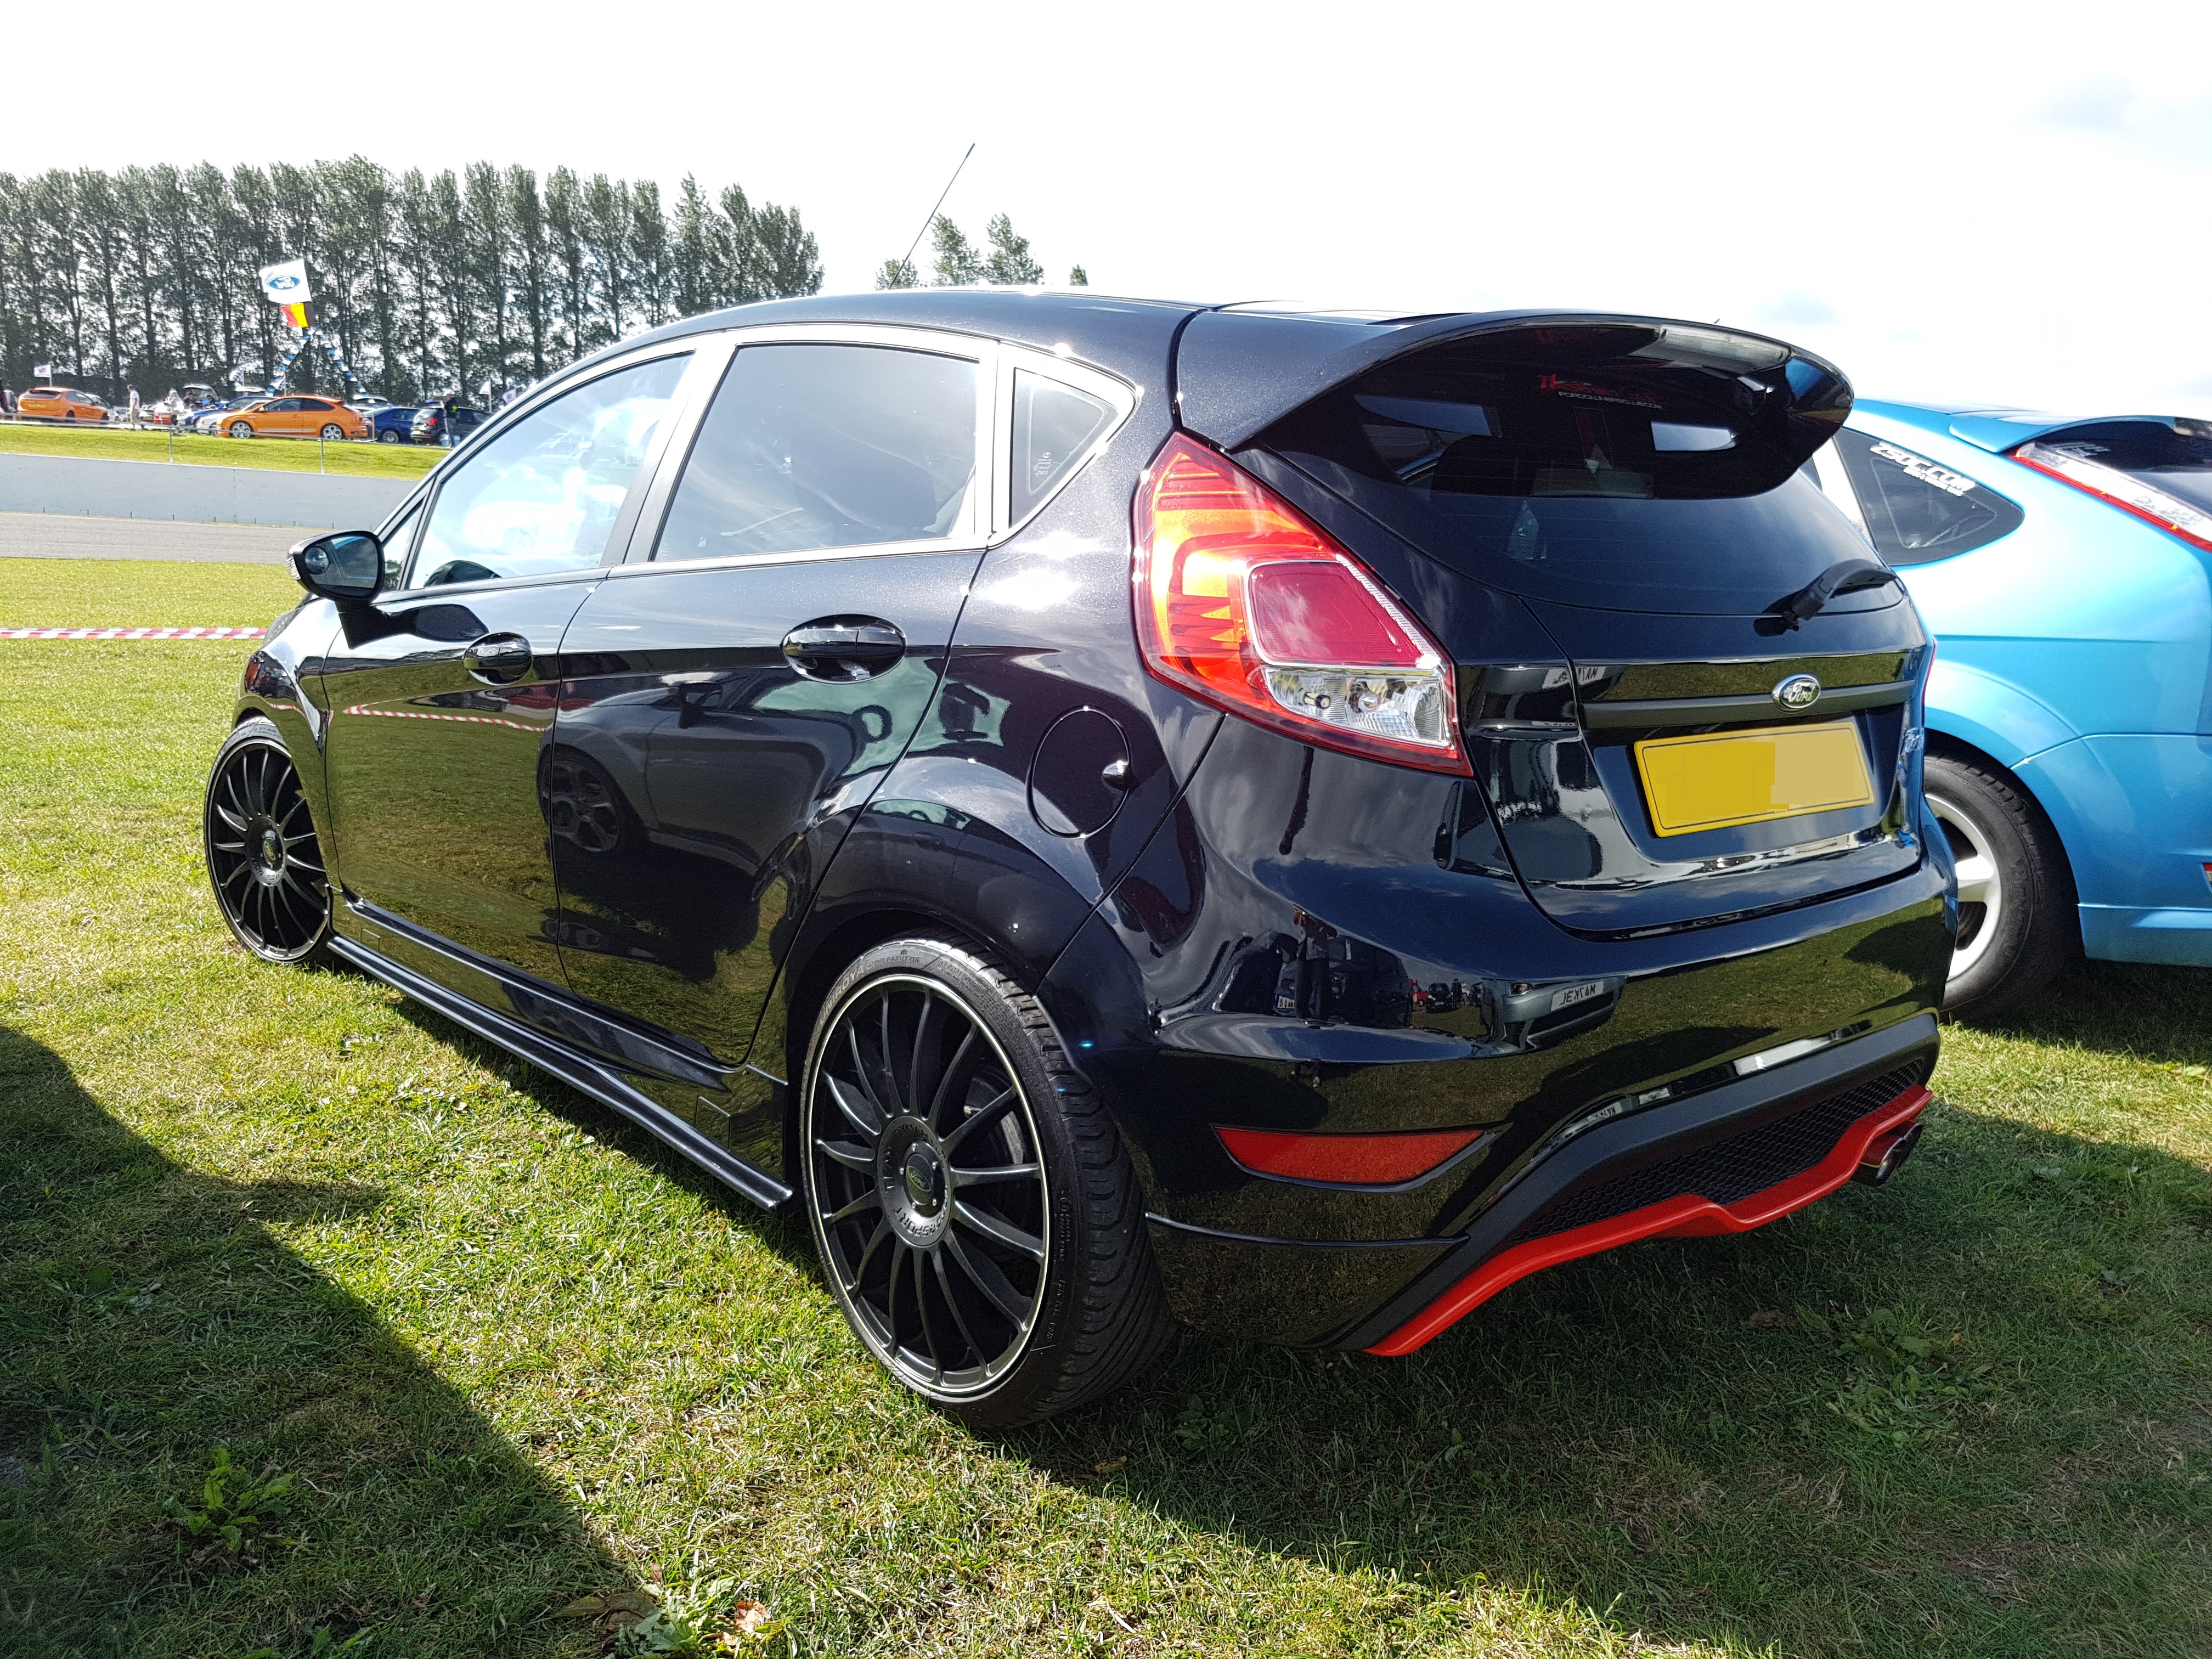 Best body modifications for MK7? Ford Fiesta Club Ford